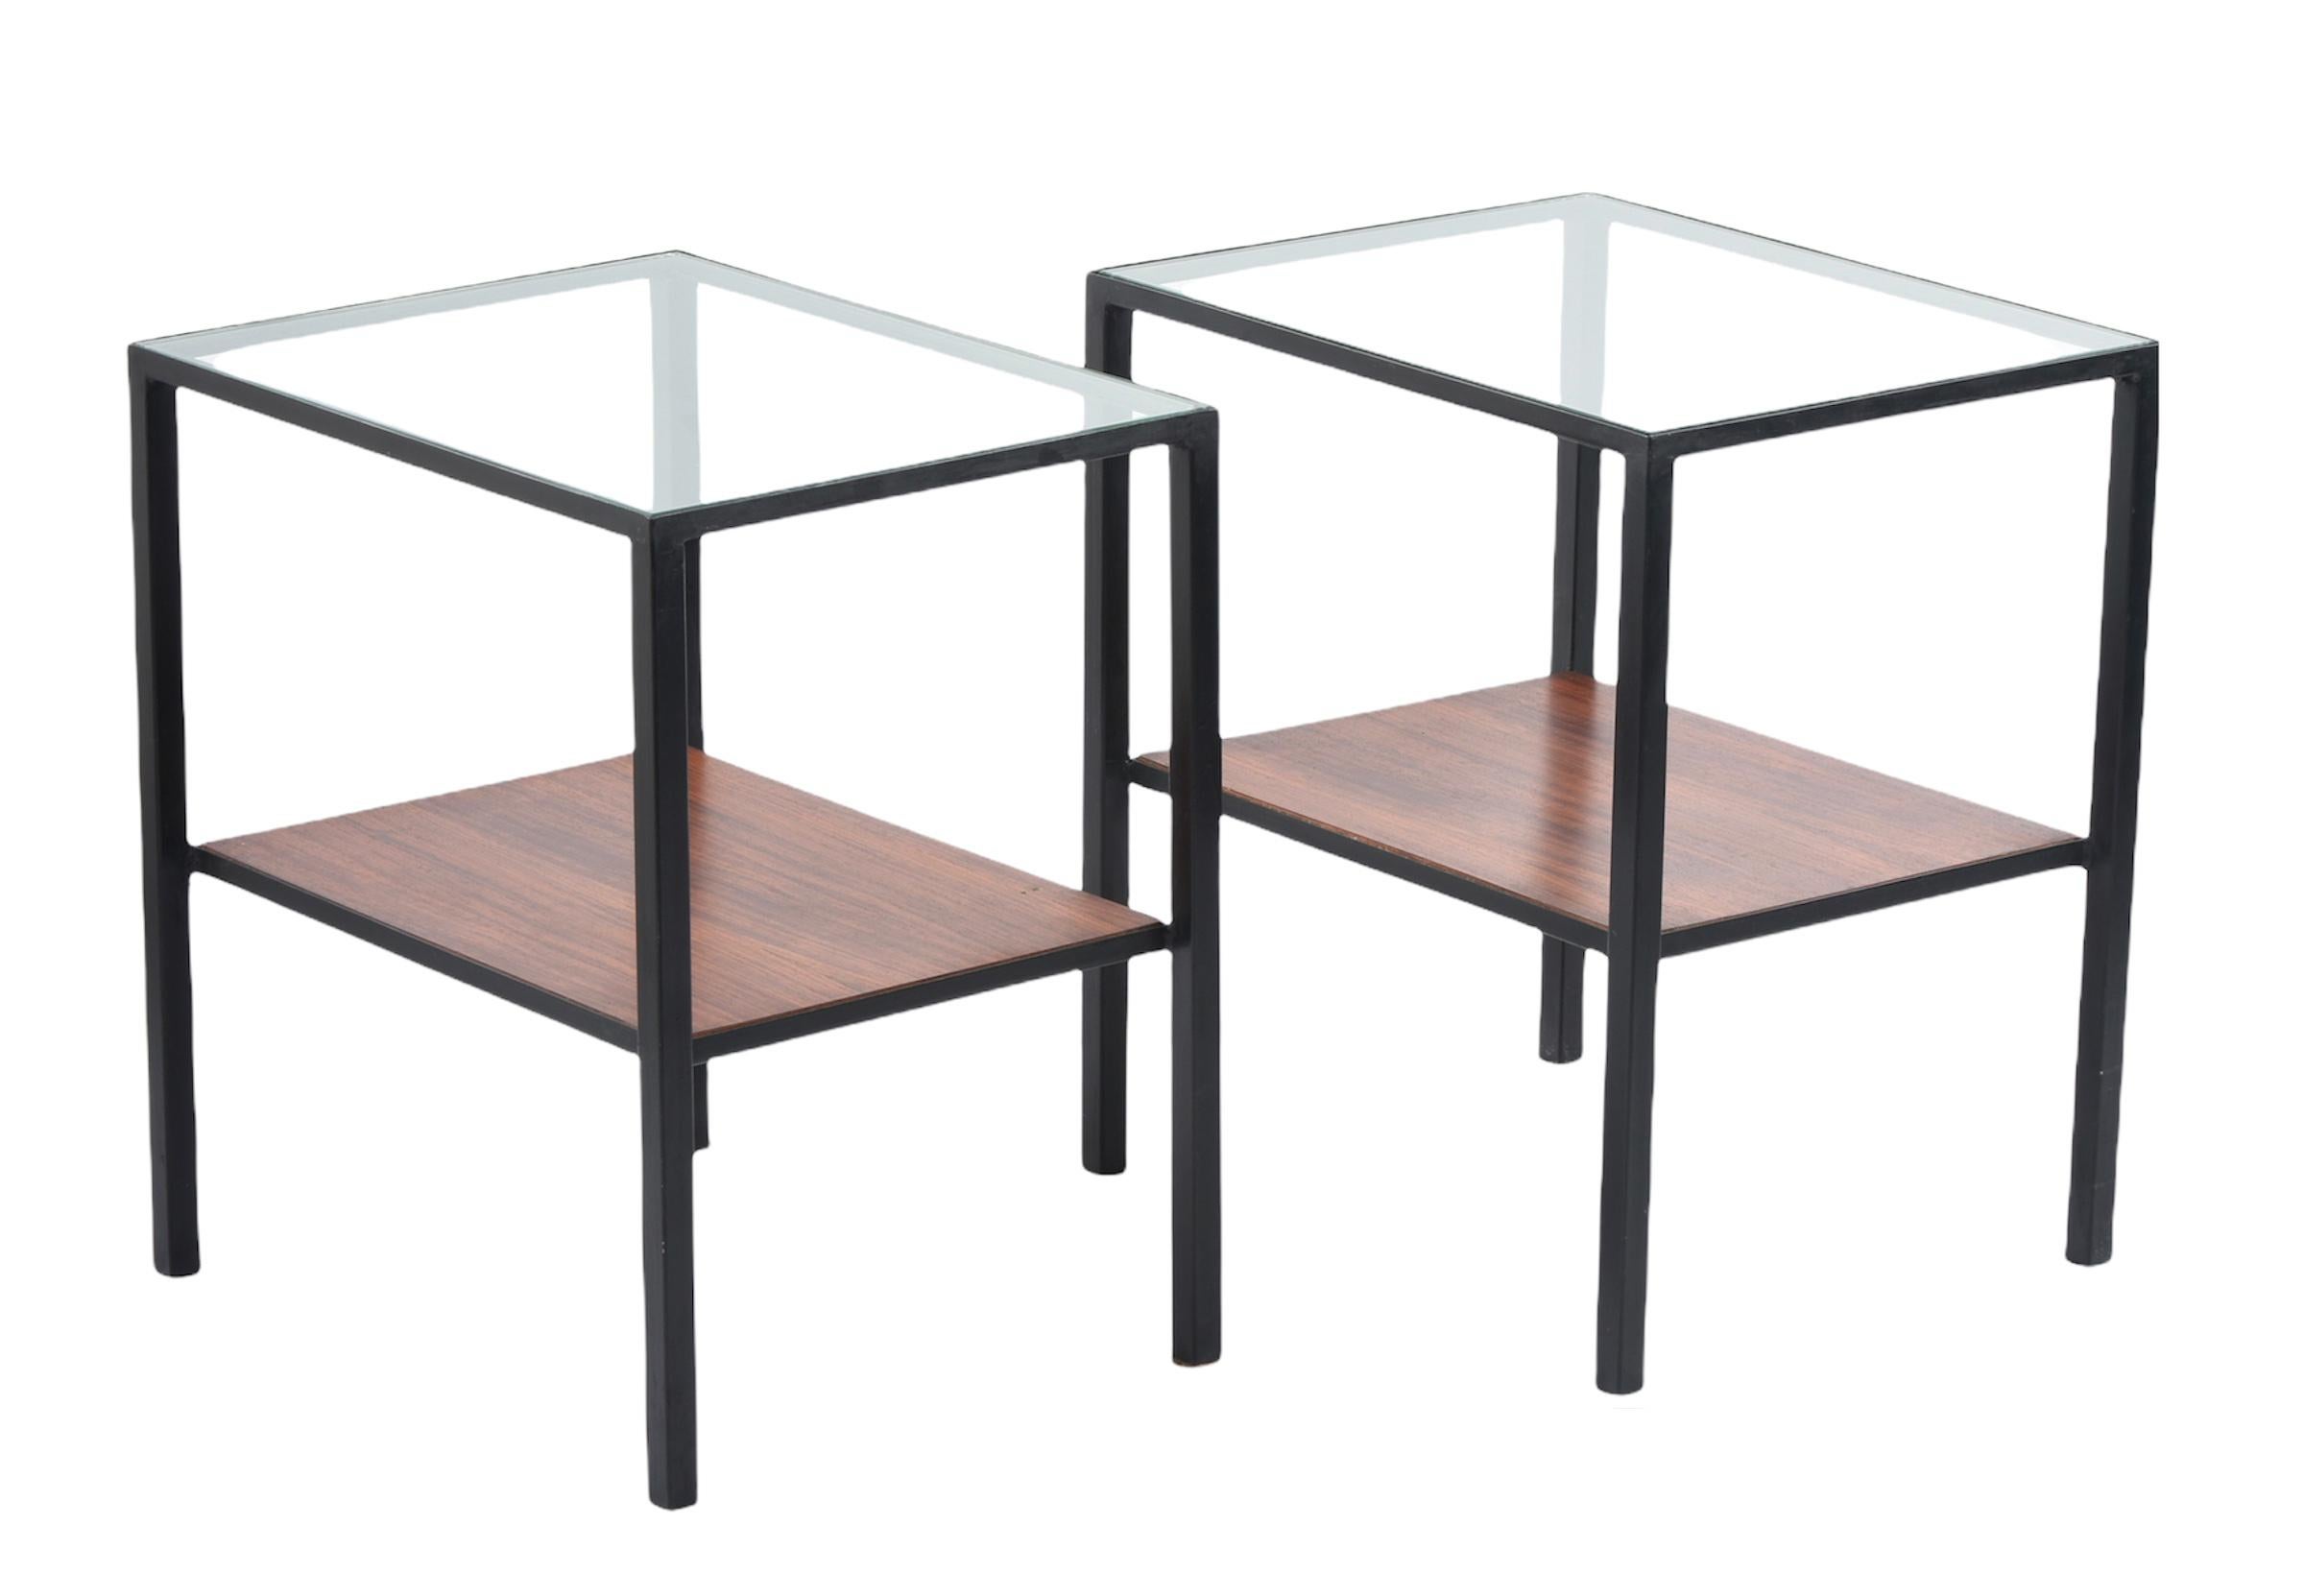 Pair of Iron, Glass and Wood Italian Coffee Table with Two Shelves, 1960s For Sale 3